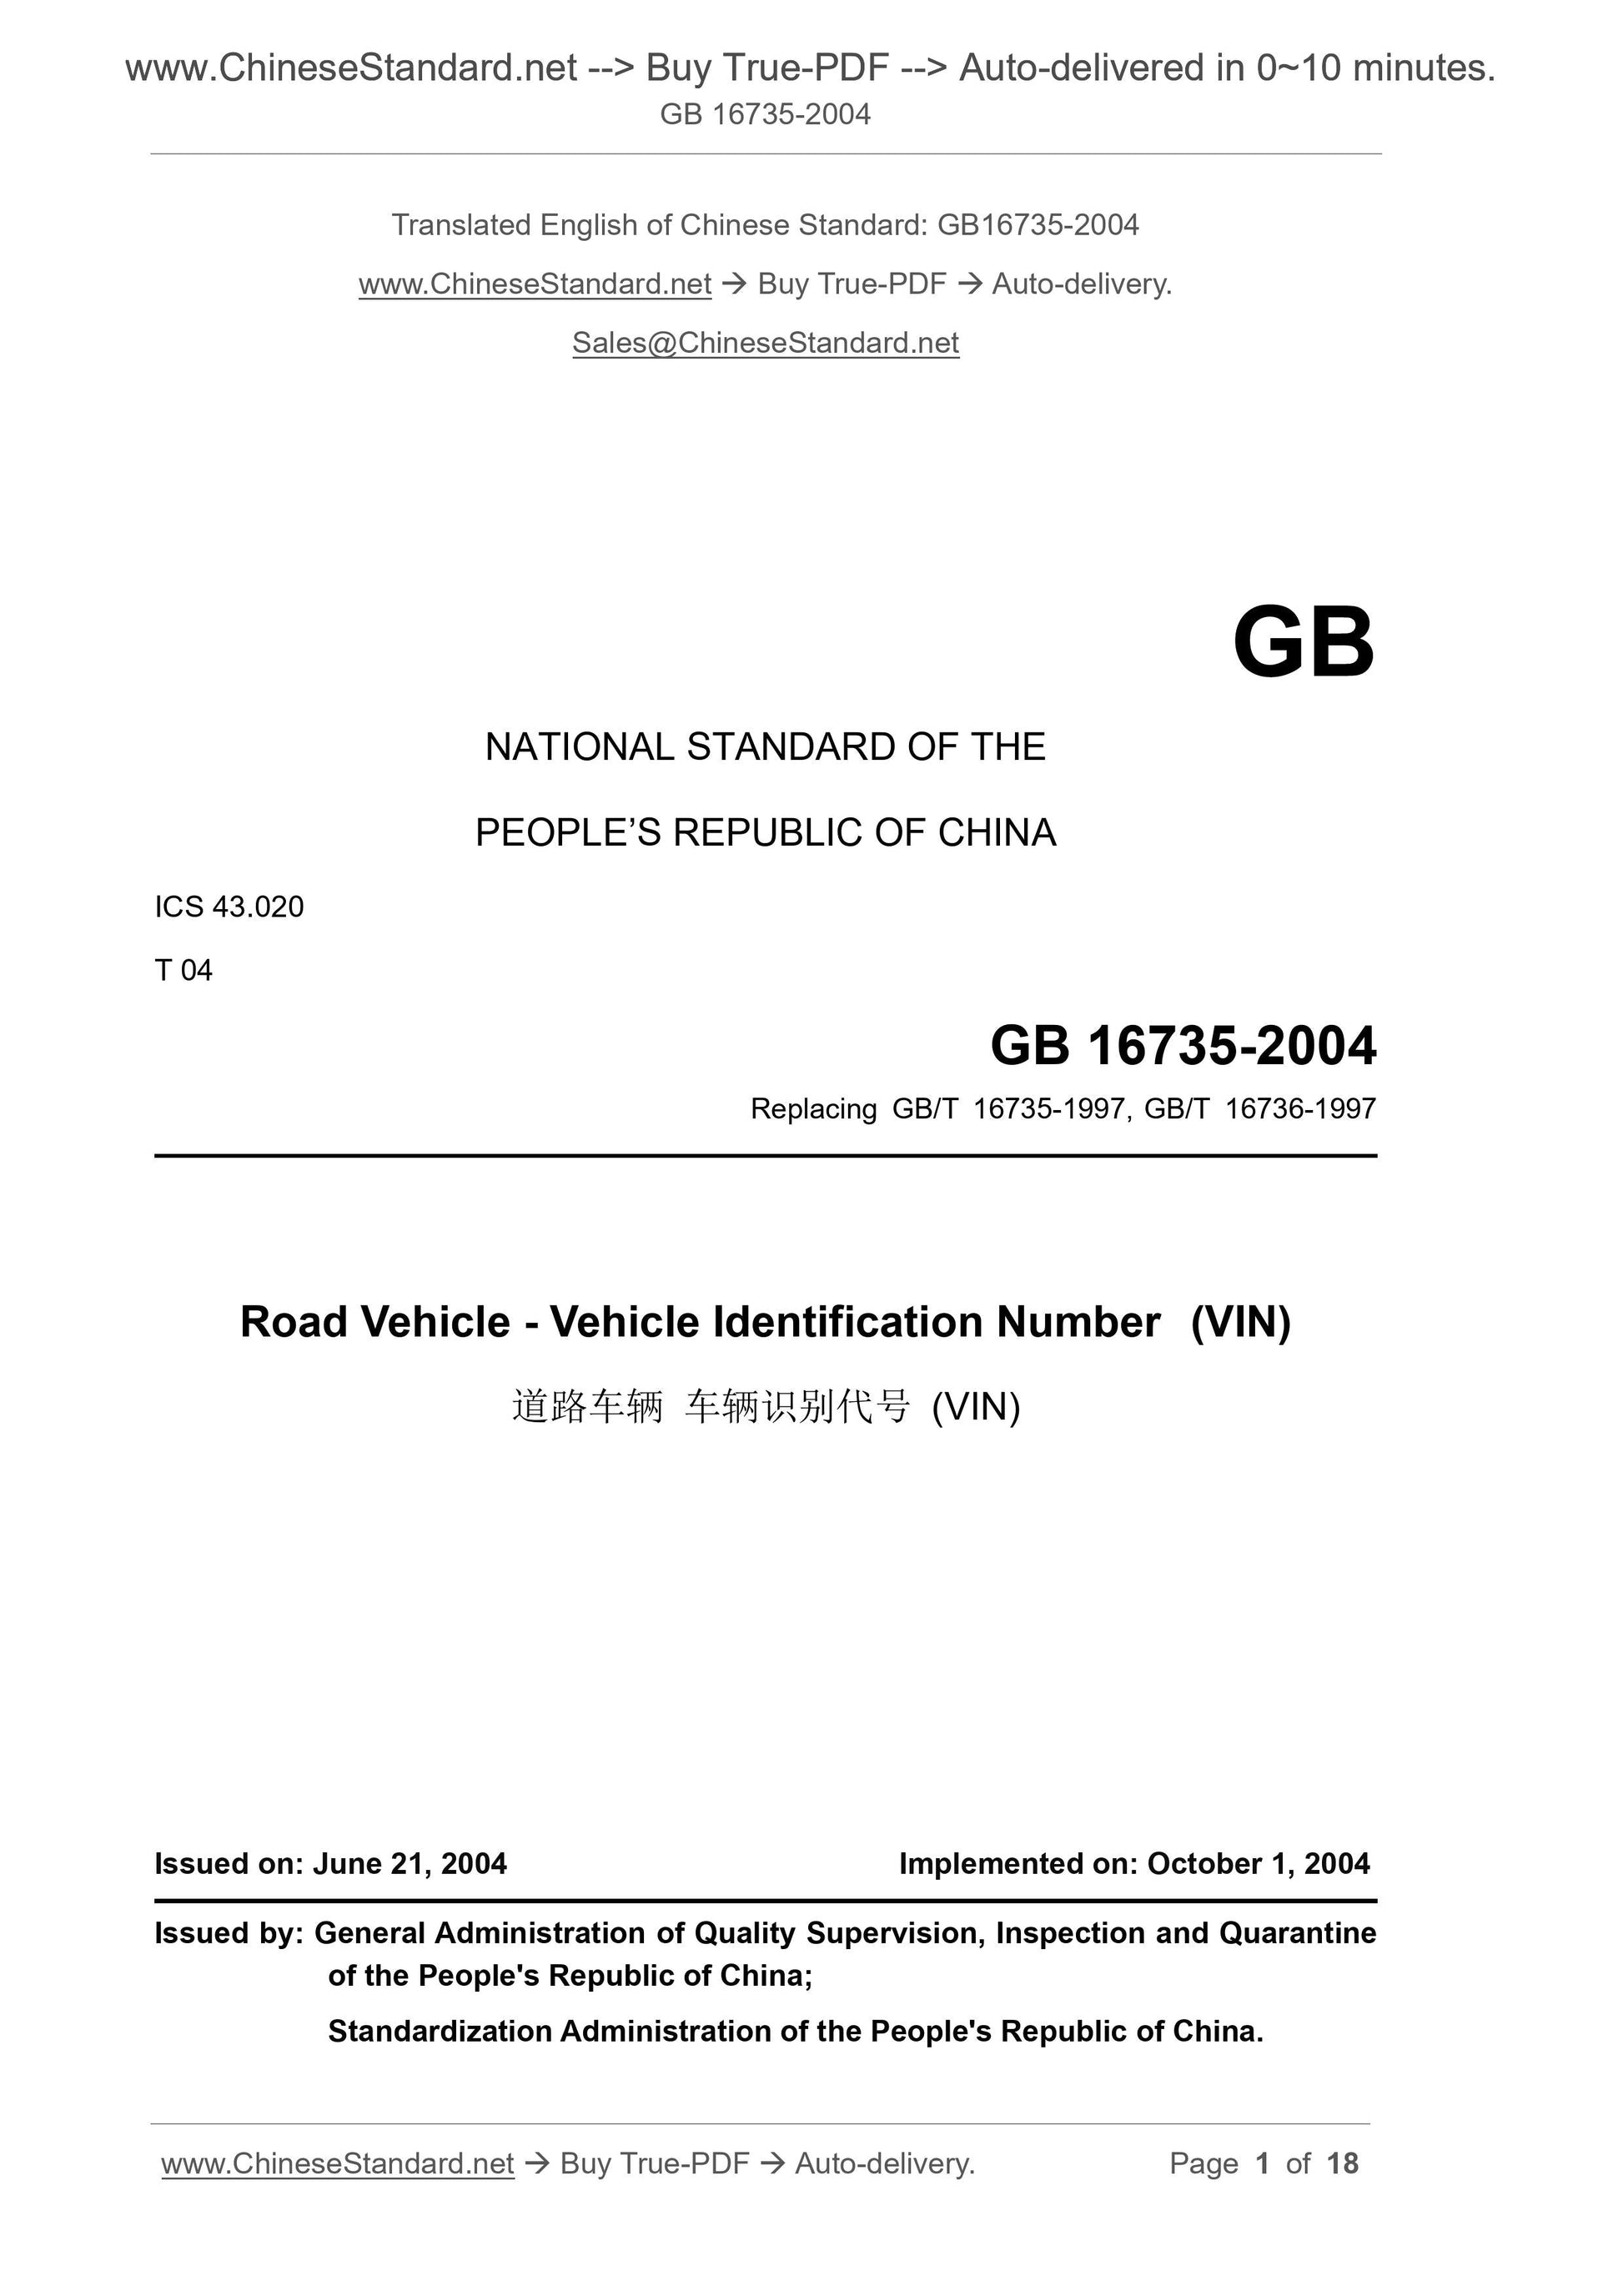 GB 16735-2004 Page 1